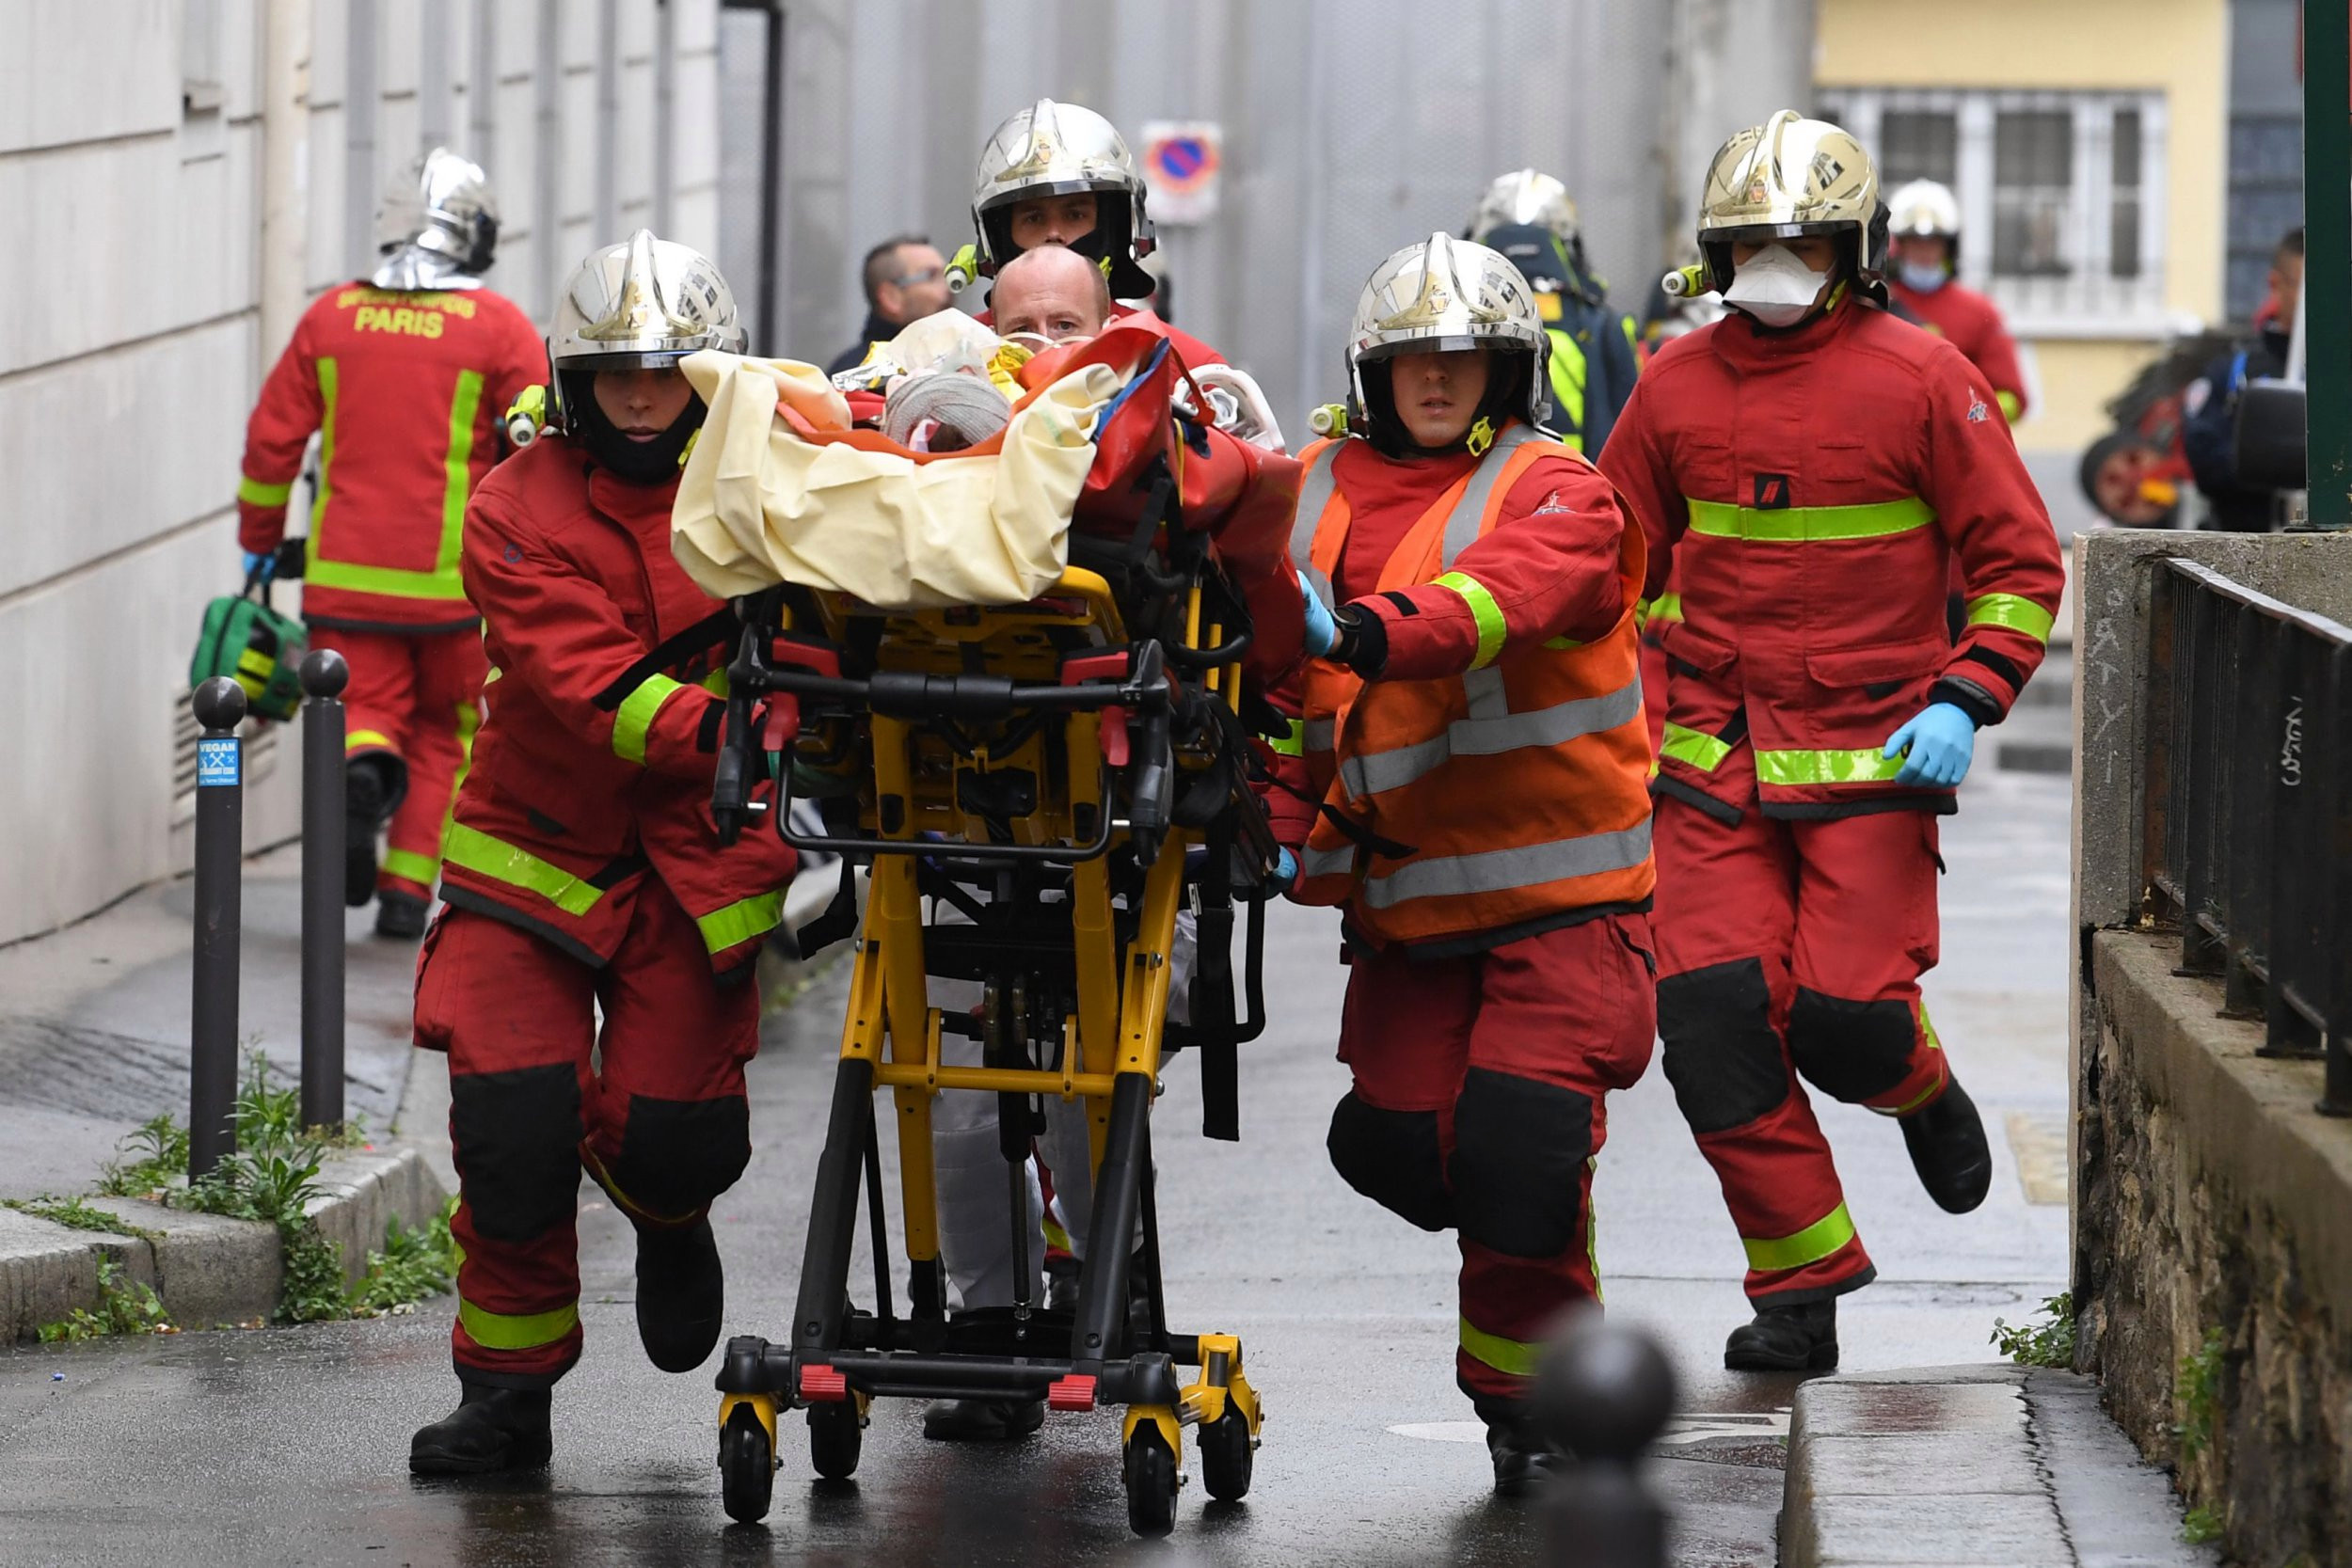 Photo of medical workers in Paris after a knife attack killed two